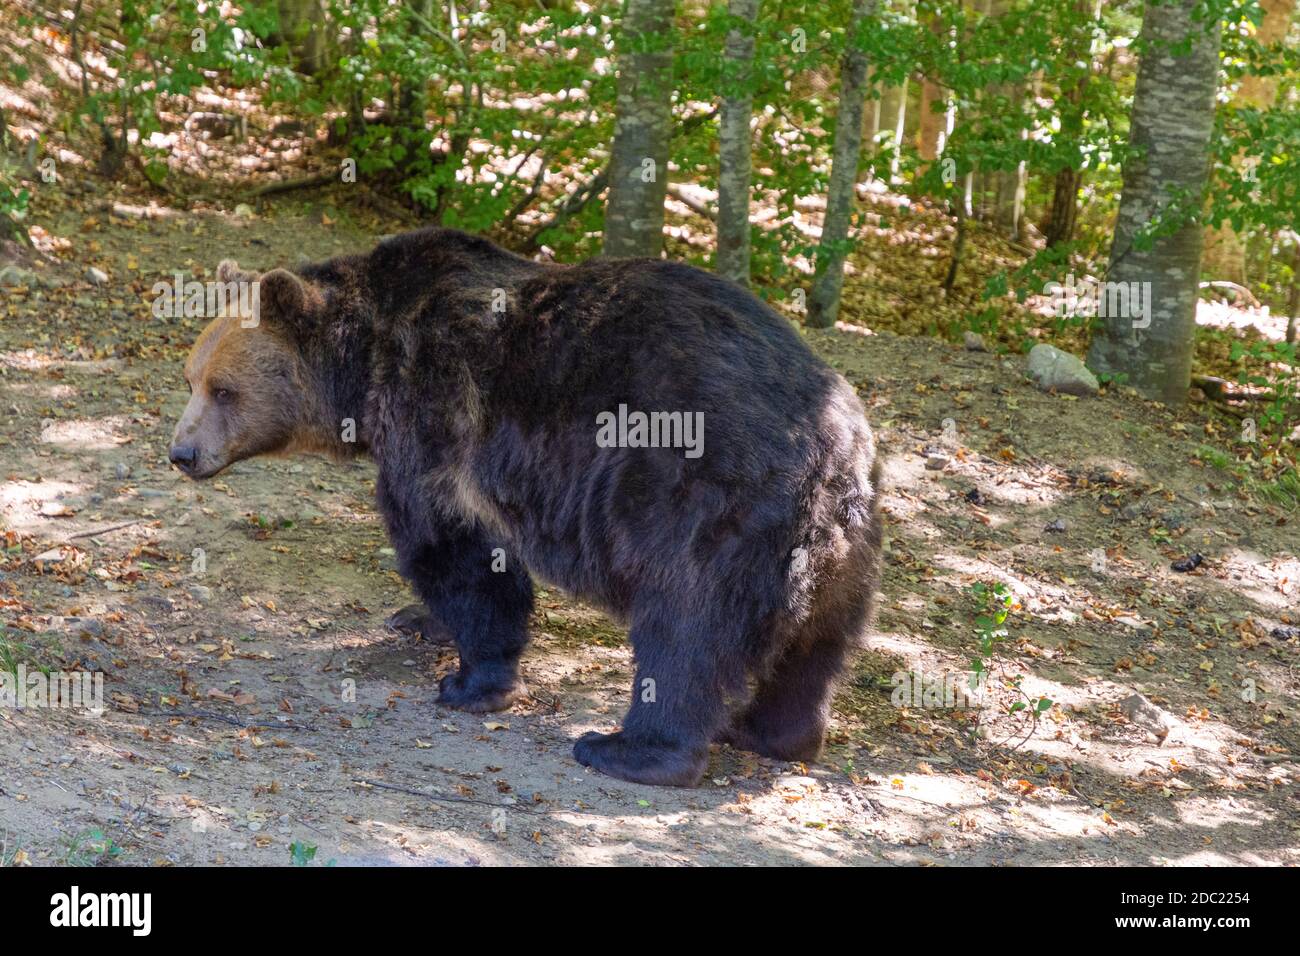 Big brown bear in a forest. European, environment. Stock Photo